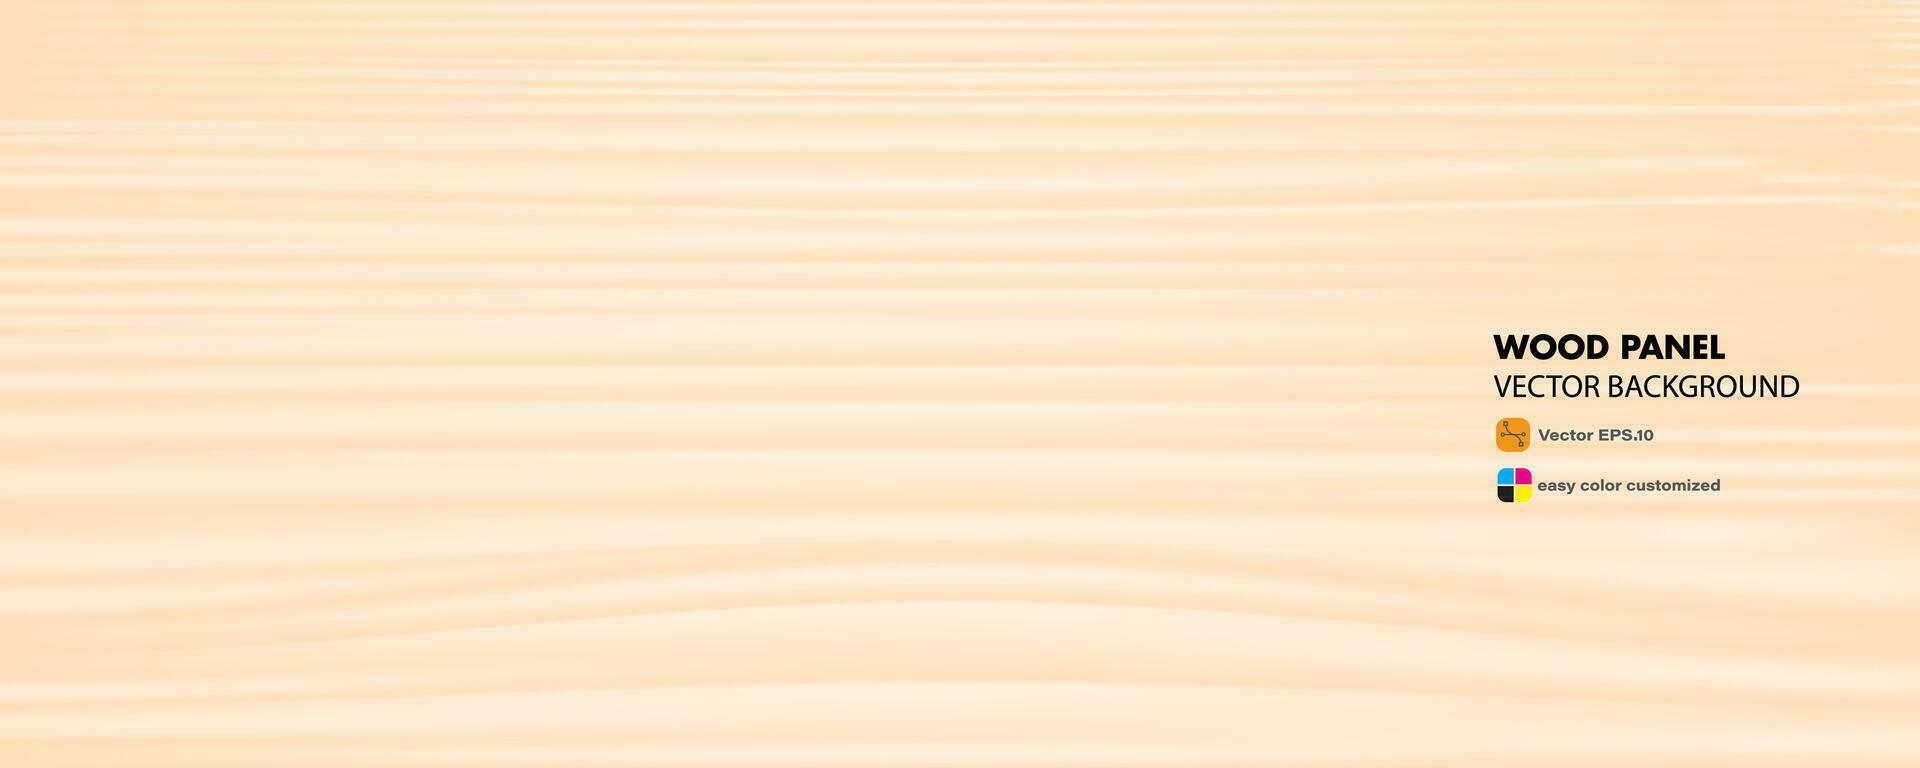 Abstract background with wooden planks. Vector illustration for your design.